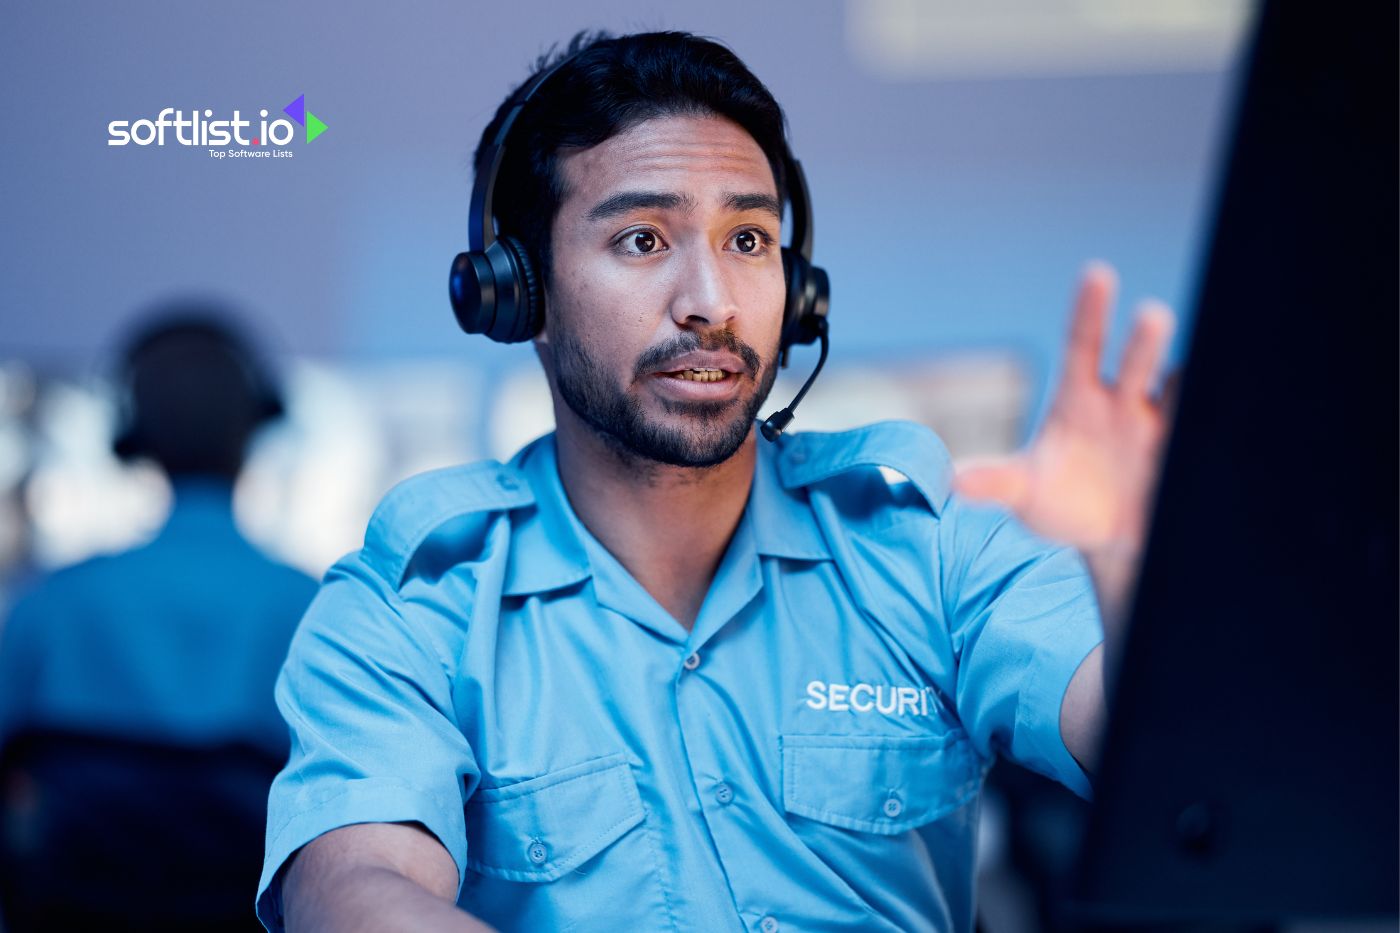 an information security officer